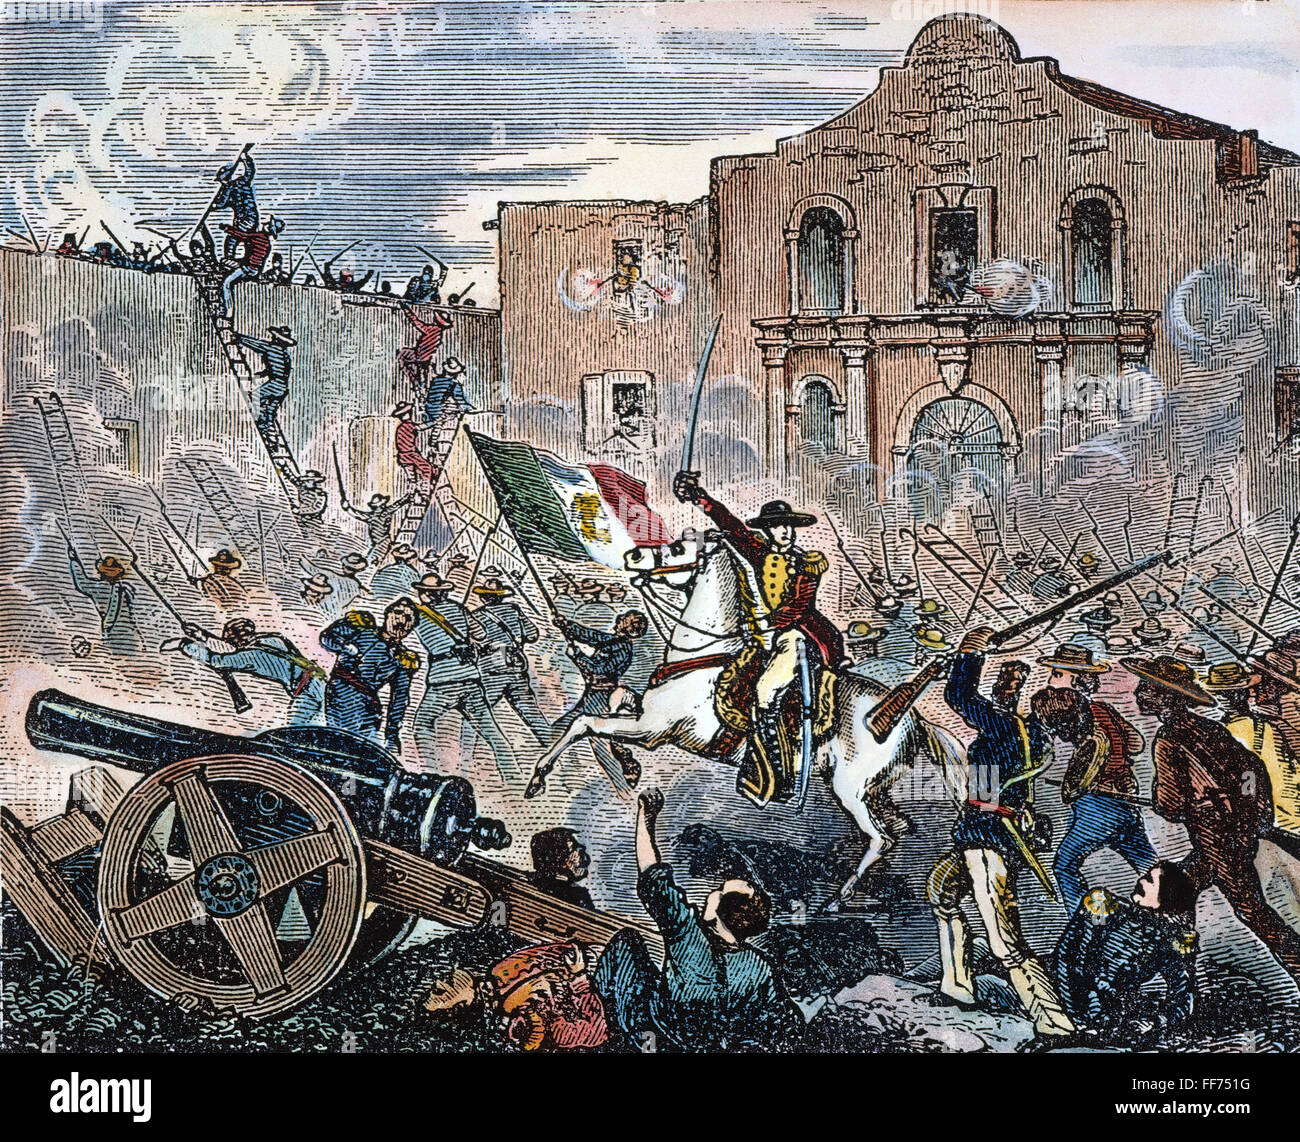 TEXAS: THE ALAMO, 1836. /nThe storming of the Alamo at San Antonio, Texas, 23 February 1836 by General Santa Anna and his troops. American engraving, 19th century. Stock Photo